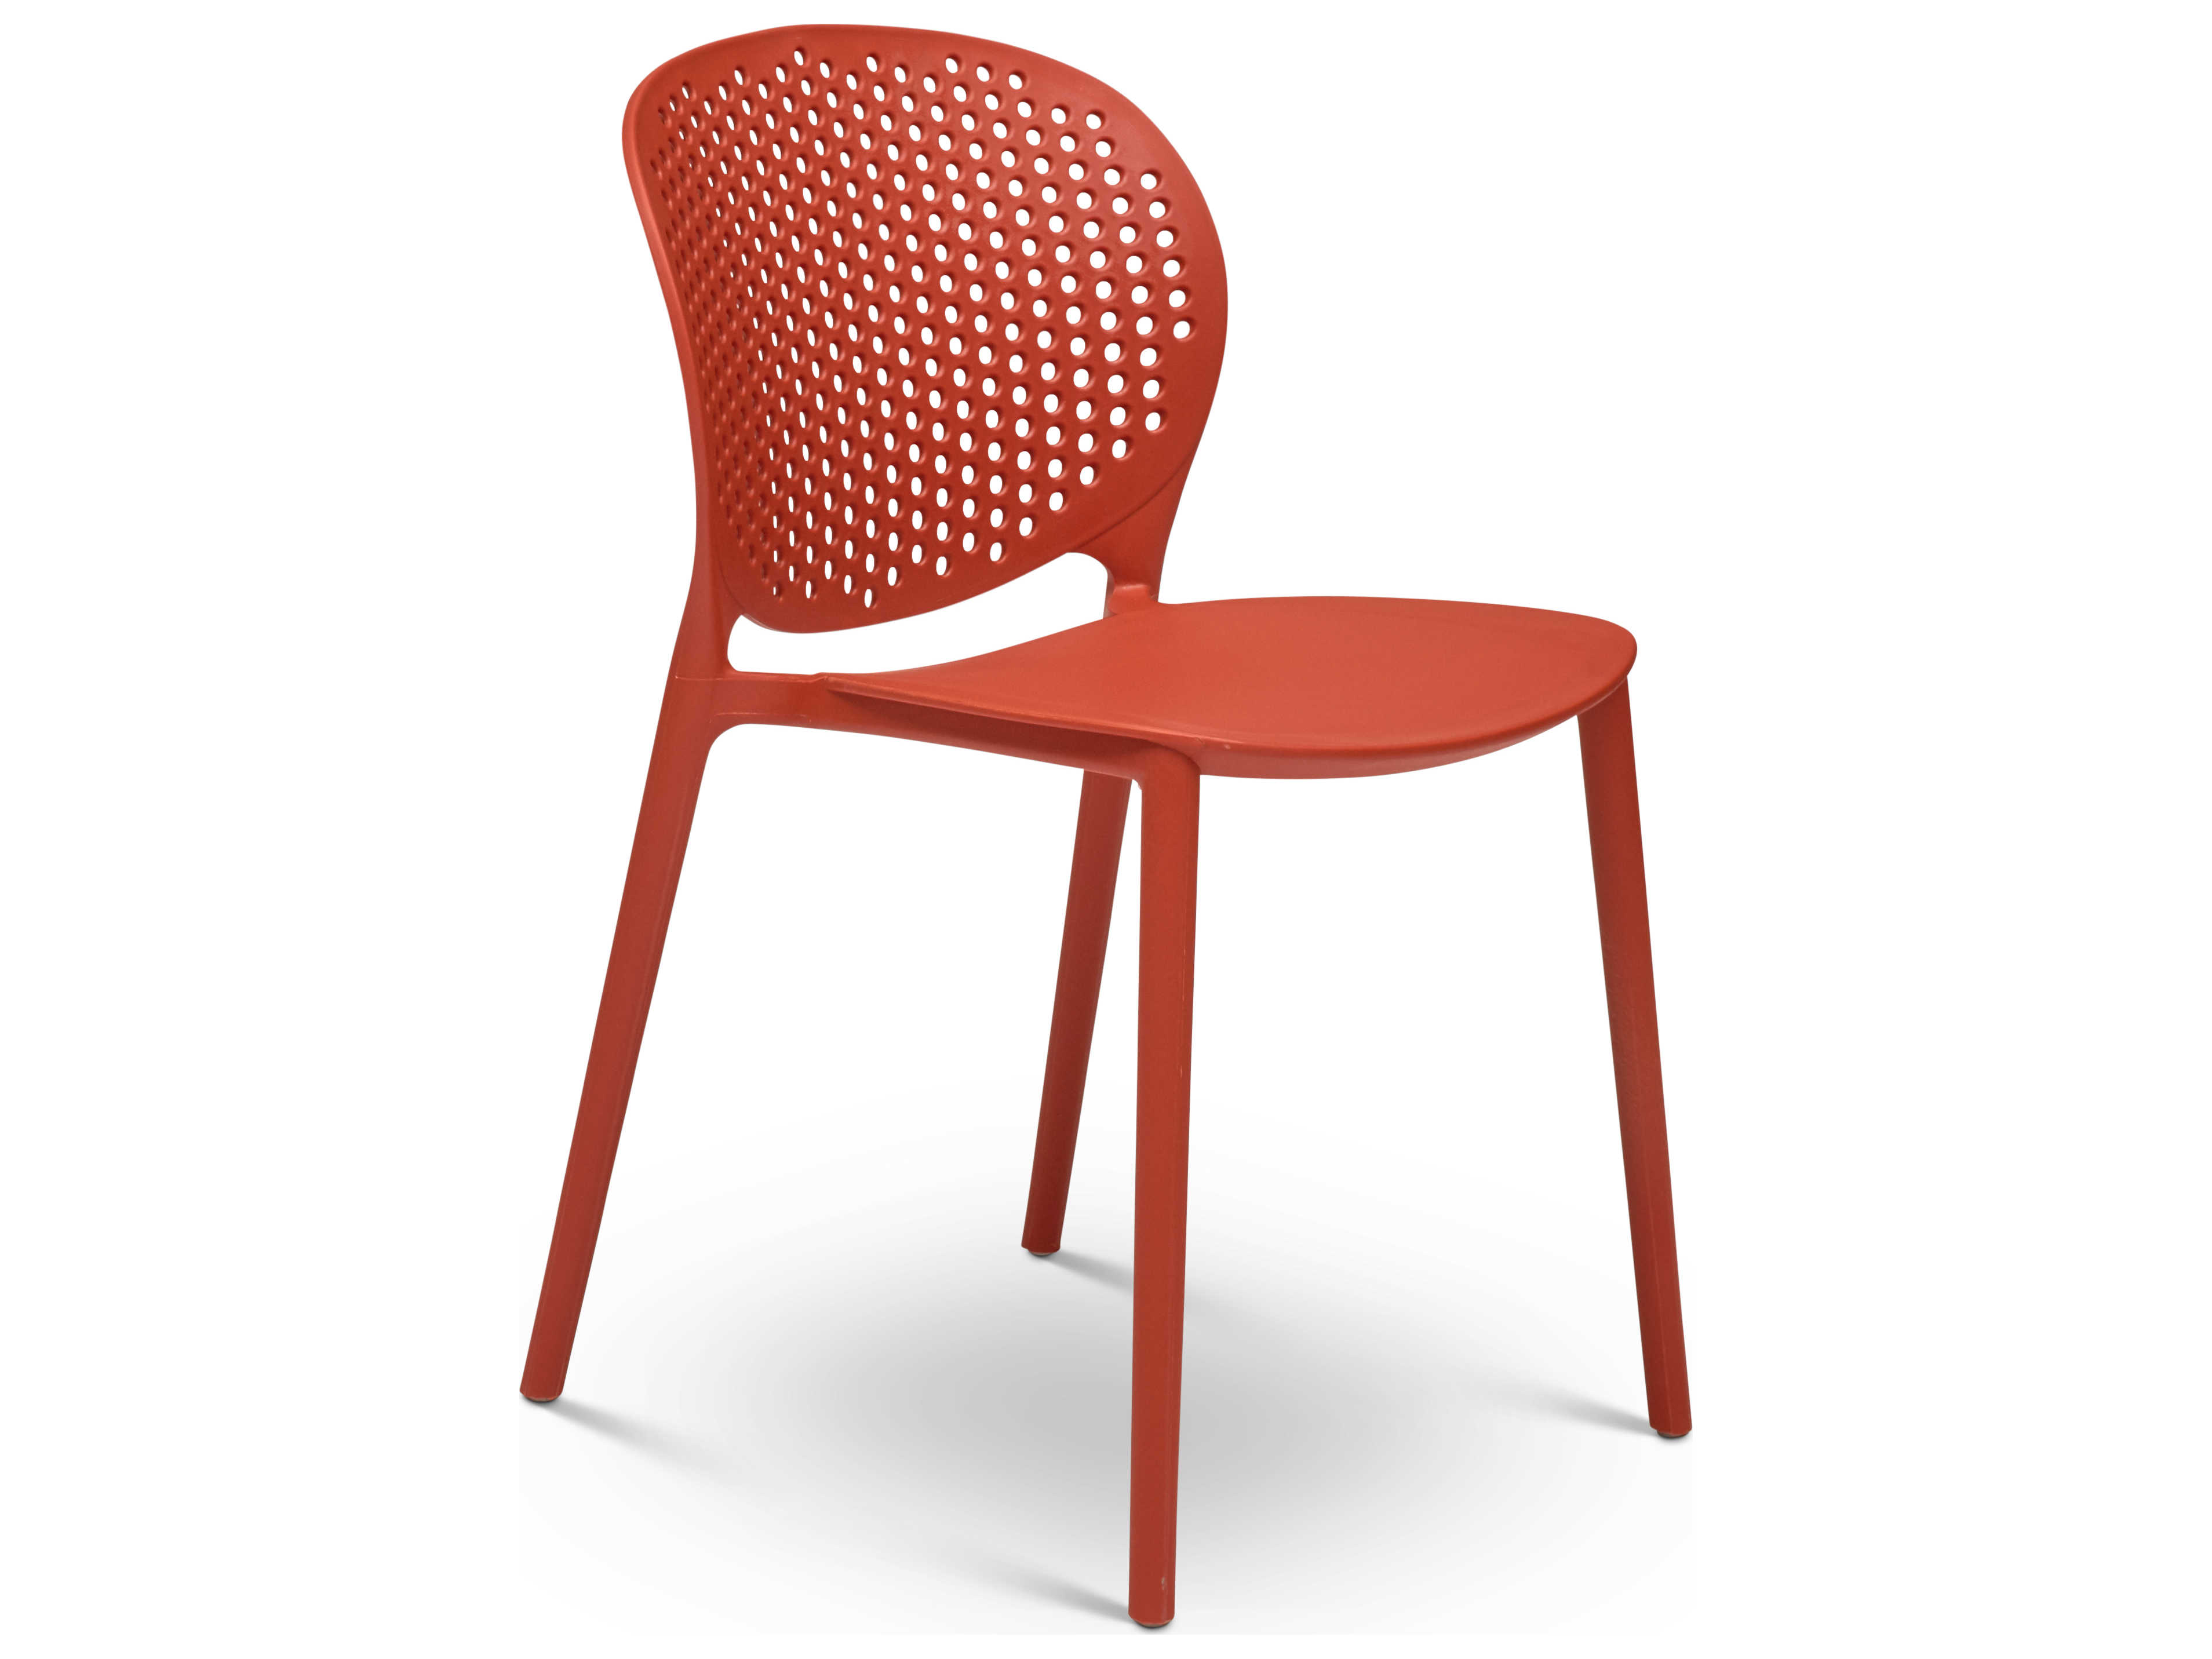 Plastic Dining Room Chairs For Sale